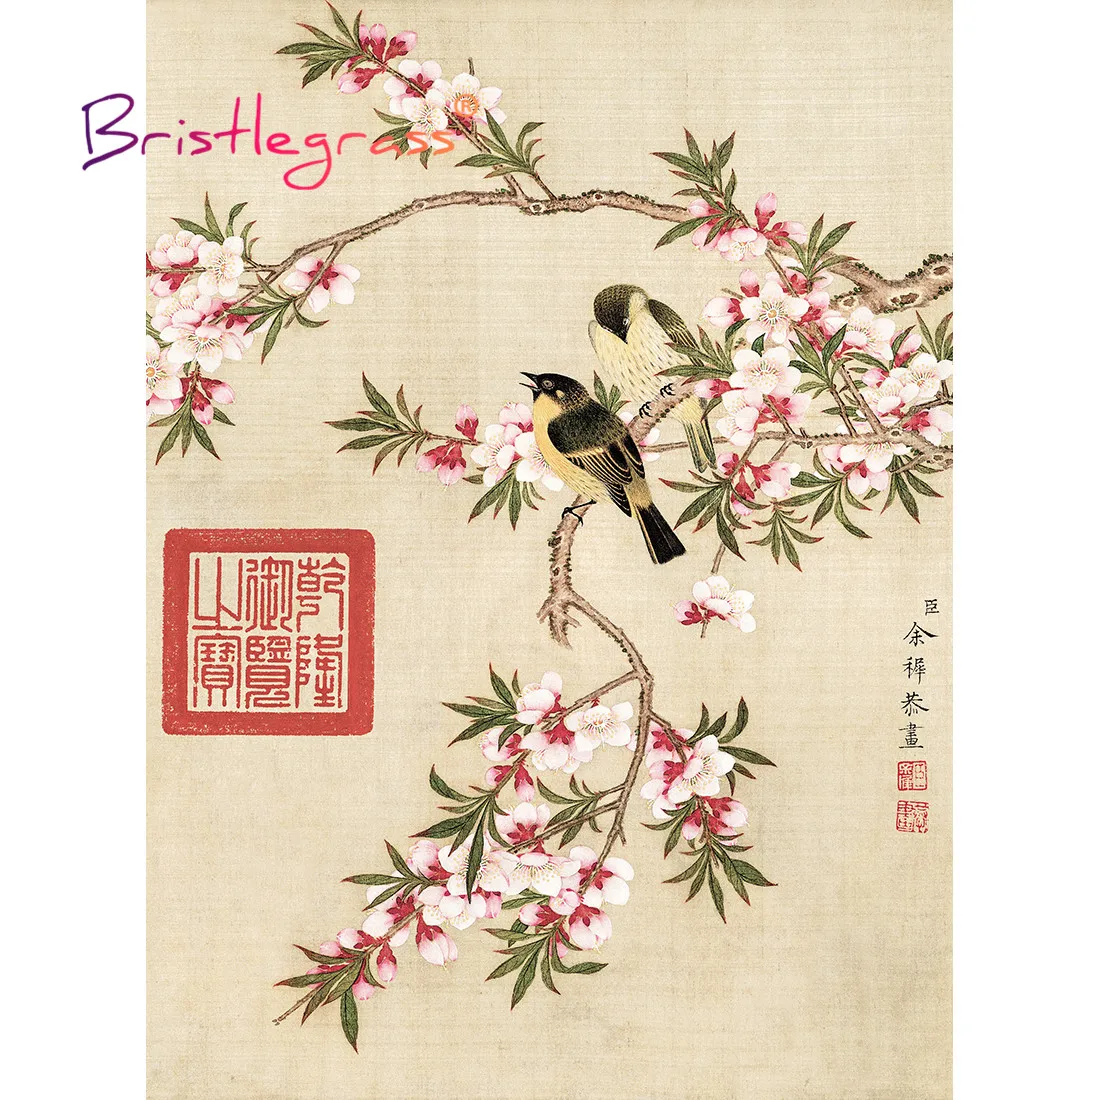 BRISTLEGRASS Wooden Jigsaw Puzzles 500 1000 Piece Peach Blossom Oriole Yuzhi Educational Toy Collectibles Chinese Painting Decor